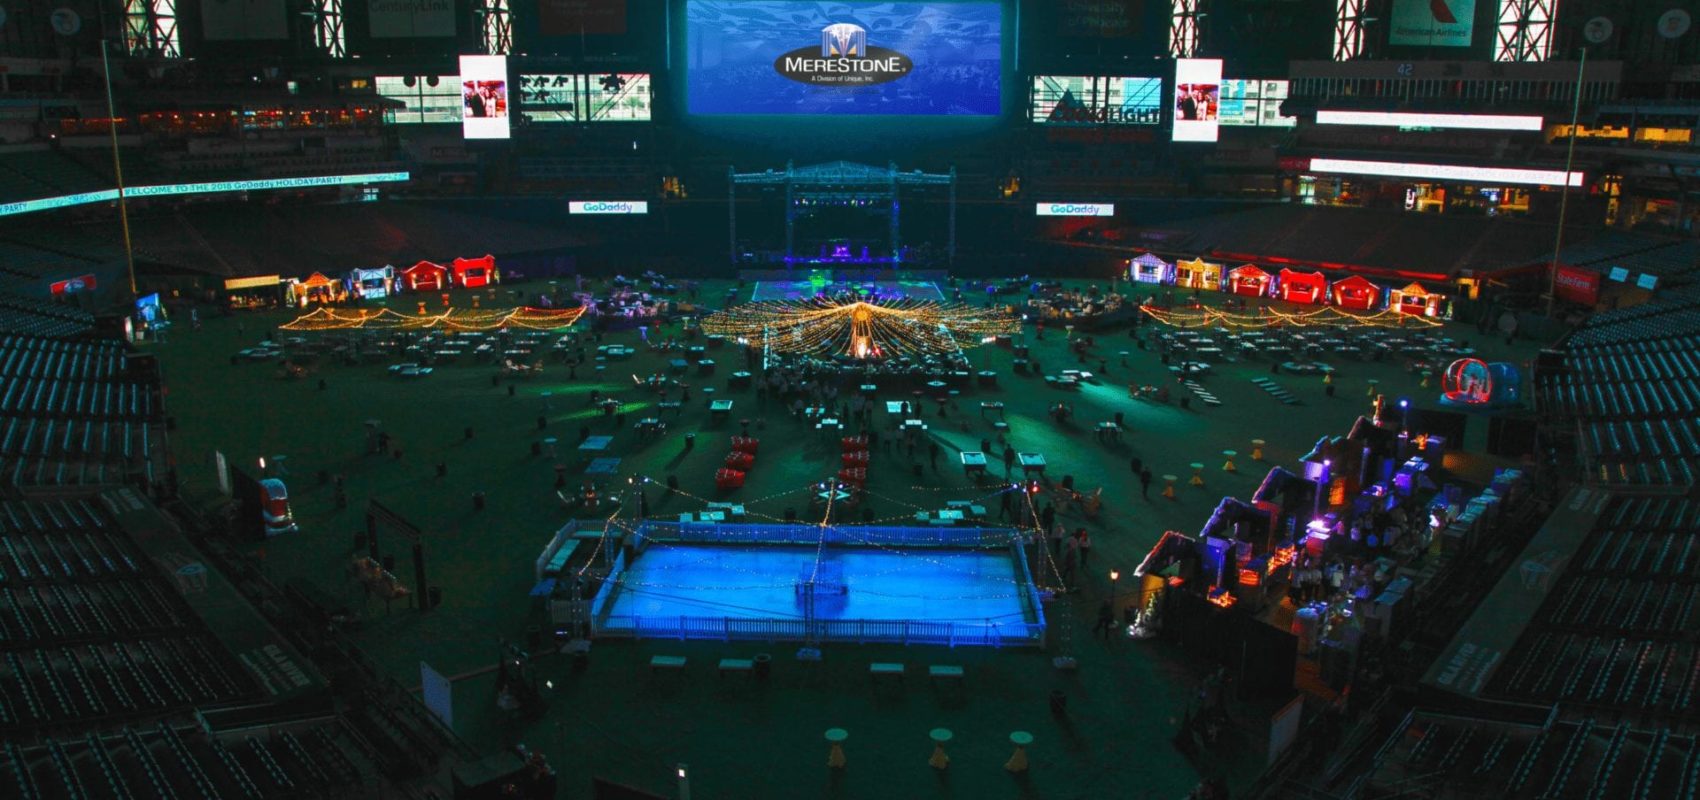 Chase-Field-Suite-View-of-Field-GoDaddy-Party